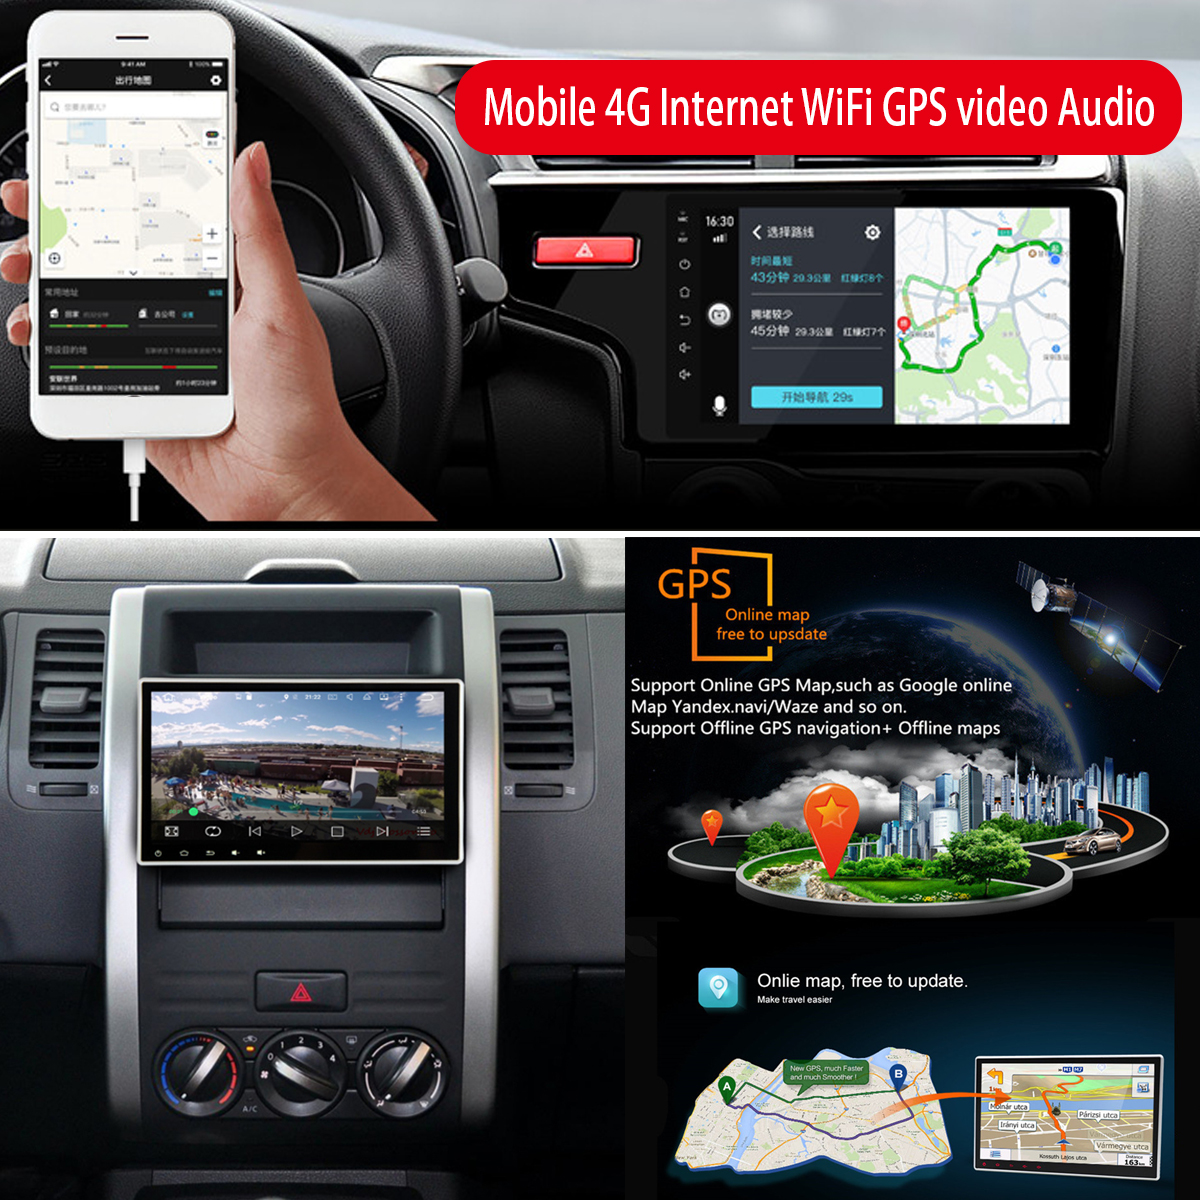 101-Inch-Adjustable-Touchscreen-Android-80-Car-Radio-Stereo-Car-GPS-Navigation-1410940